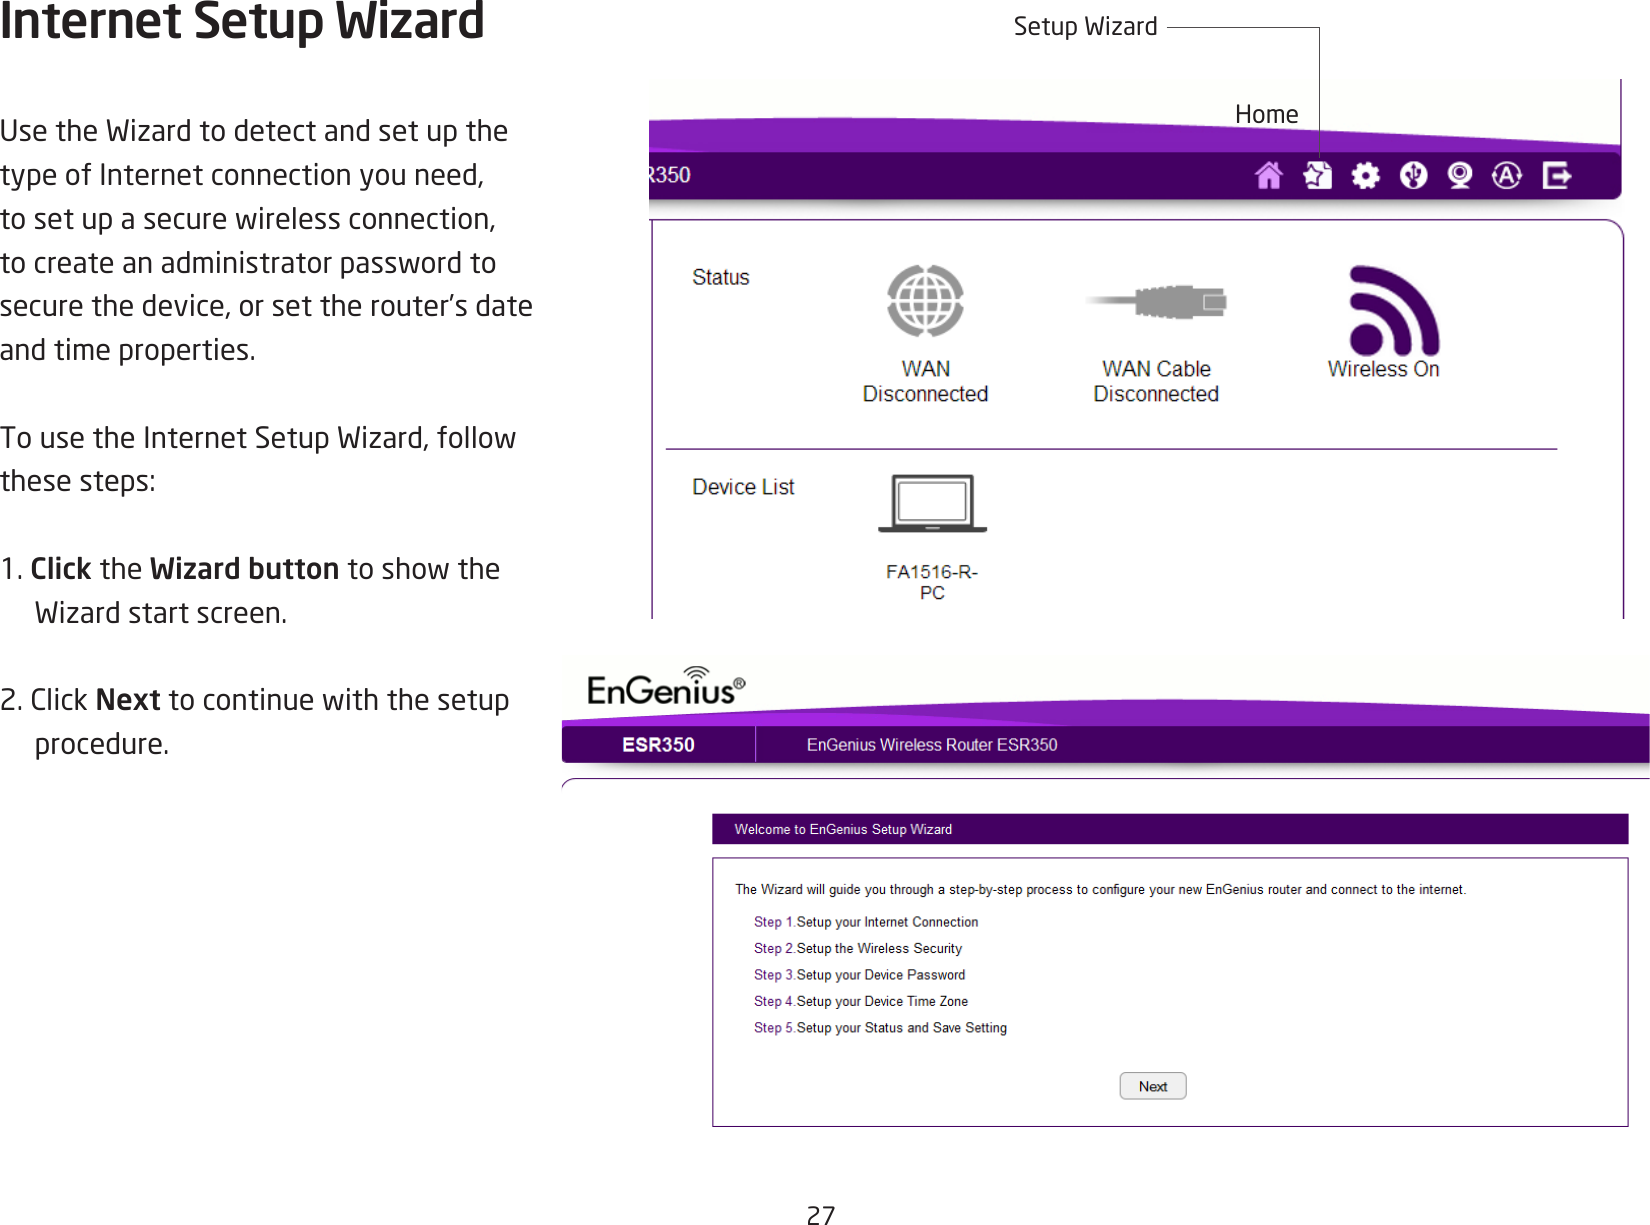 27Internet Setup WizardUsetheWizardtodetectandsetupthetype of Internet connection you need, tosetupasecurewirelessconnection,tocreateanadministratorpasswordtosecure the device, or set the router’s date and time properties.TousetheInternetSetupWizard,followthese steps:1. Click the Wizard buttontoshowtheWizardstartscreen.2.ClickNexttocontinuewiththesetupprocedure.HomeSetupWizard